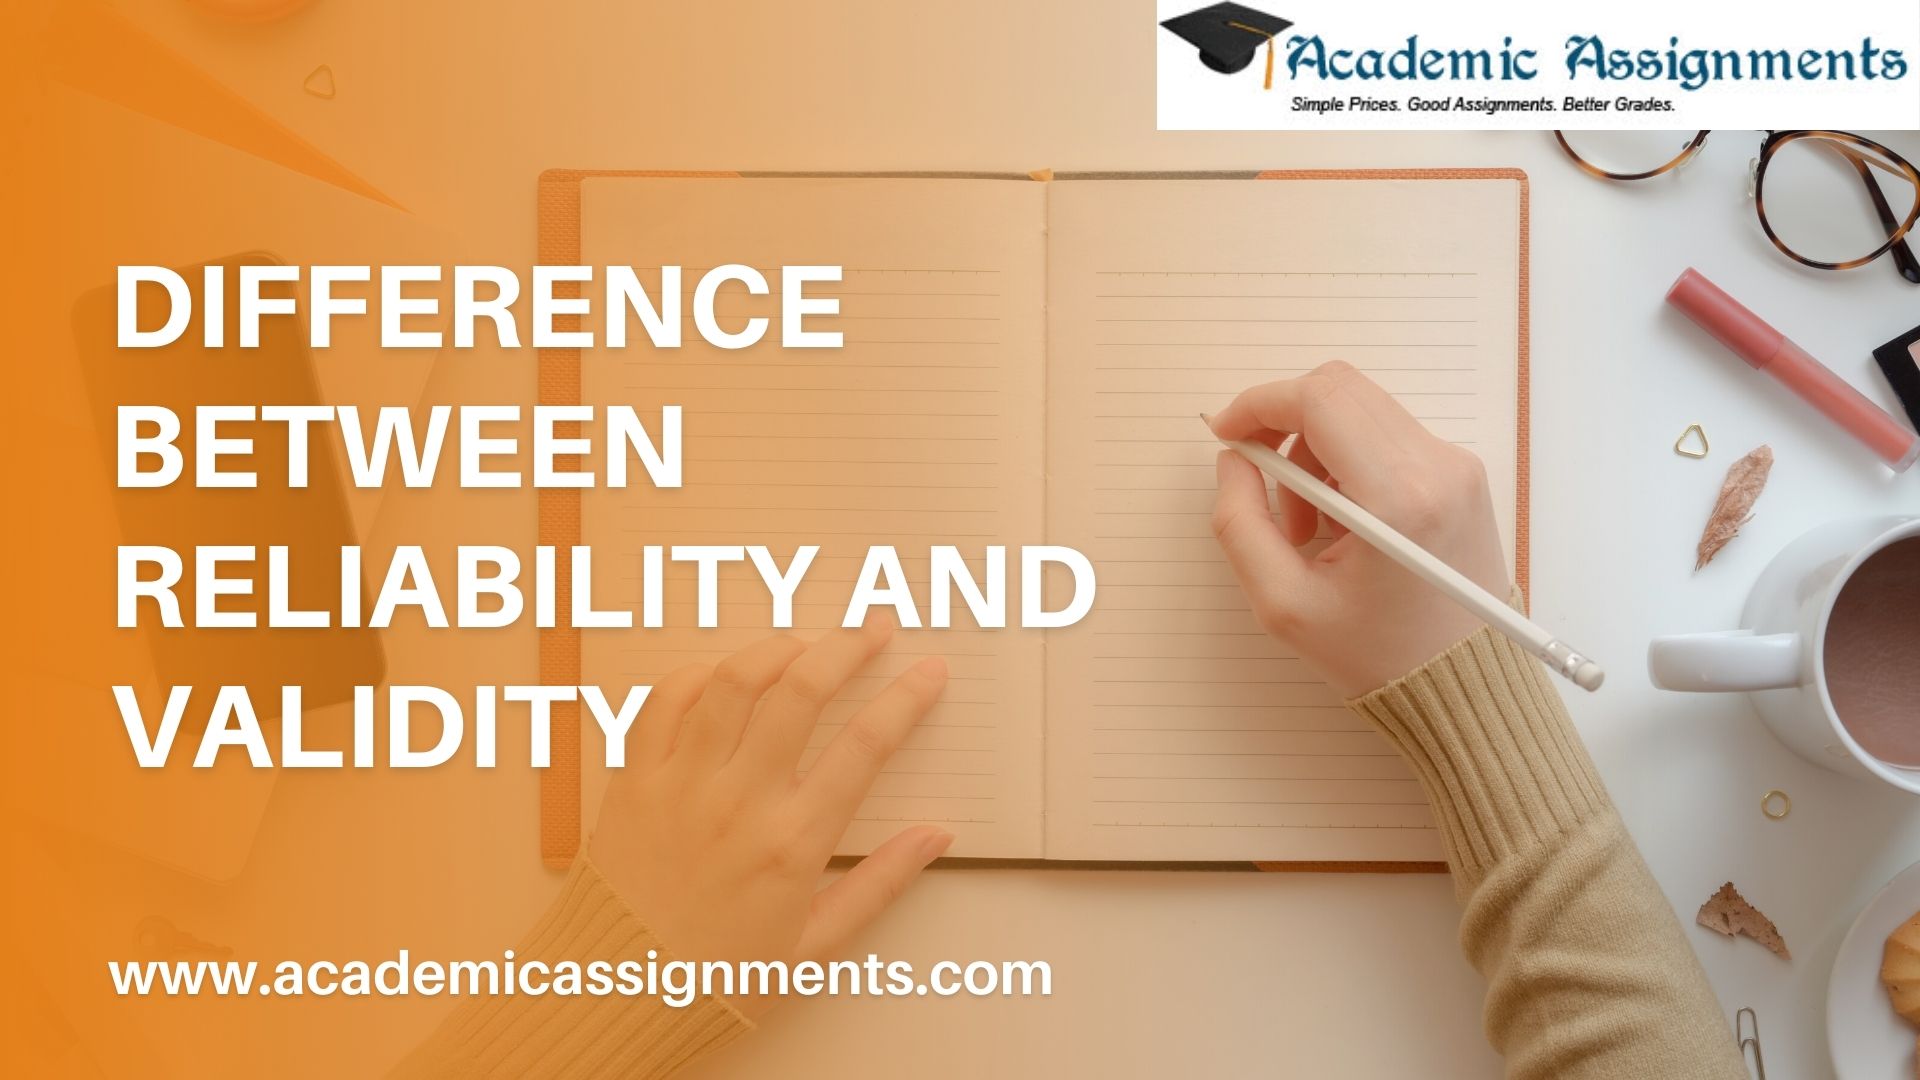 DIFFERENCE BETWEEN RELIABILITY AND VALIDITY